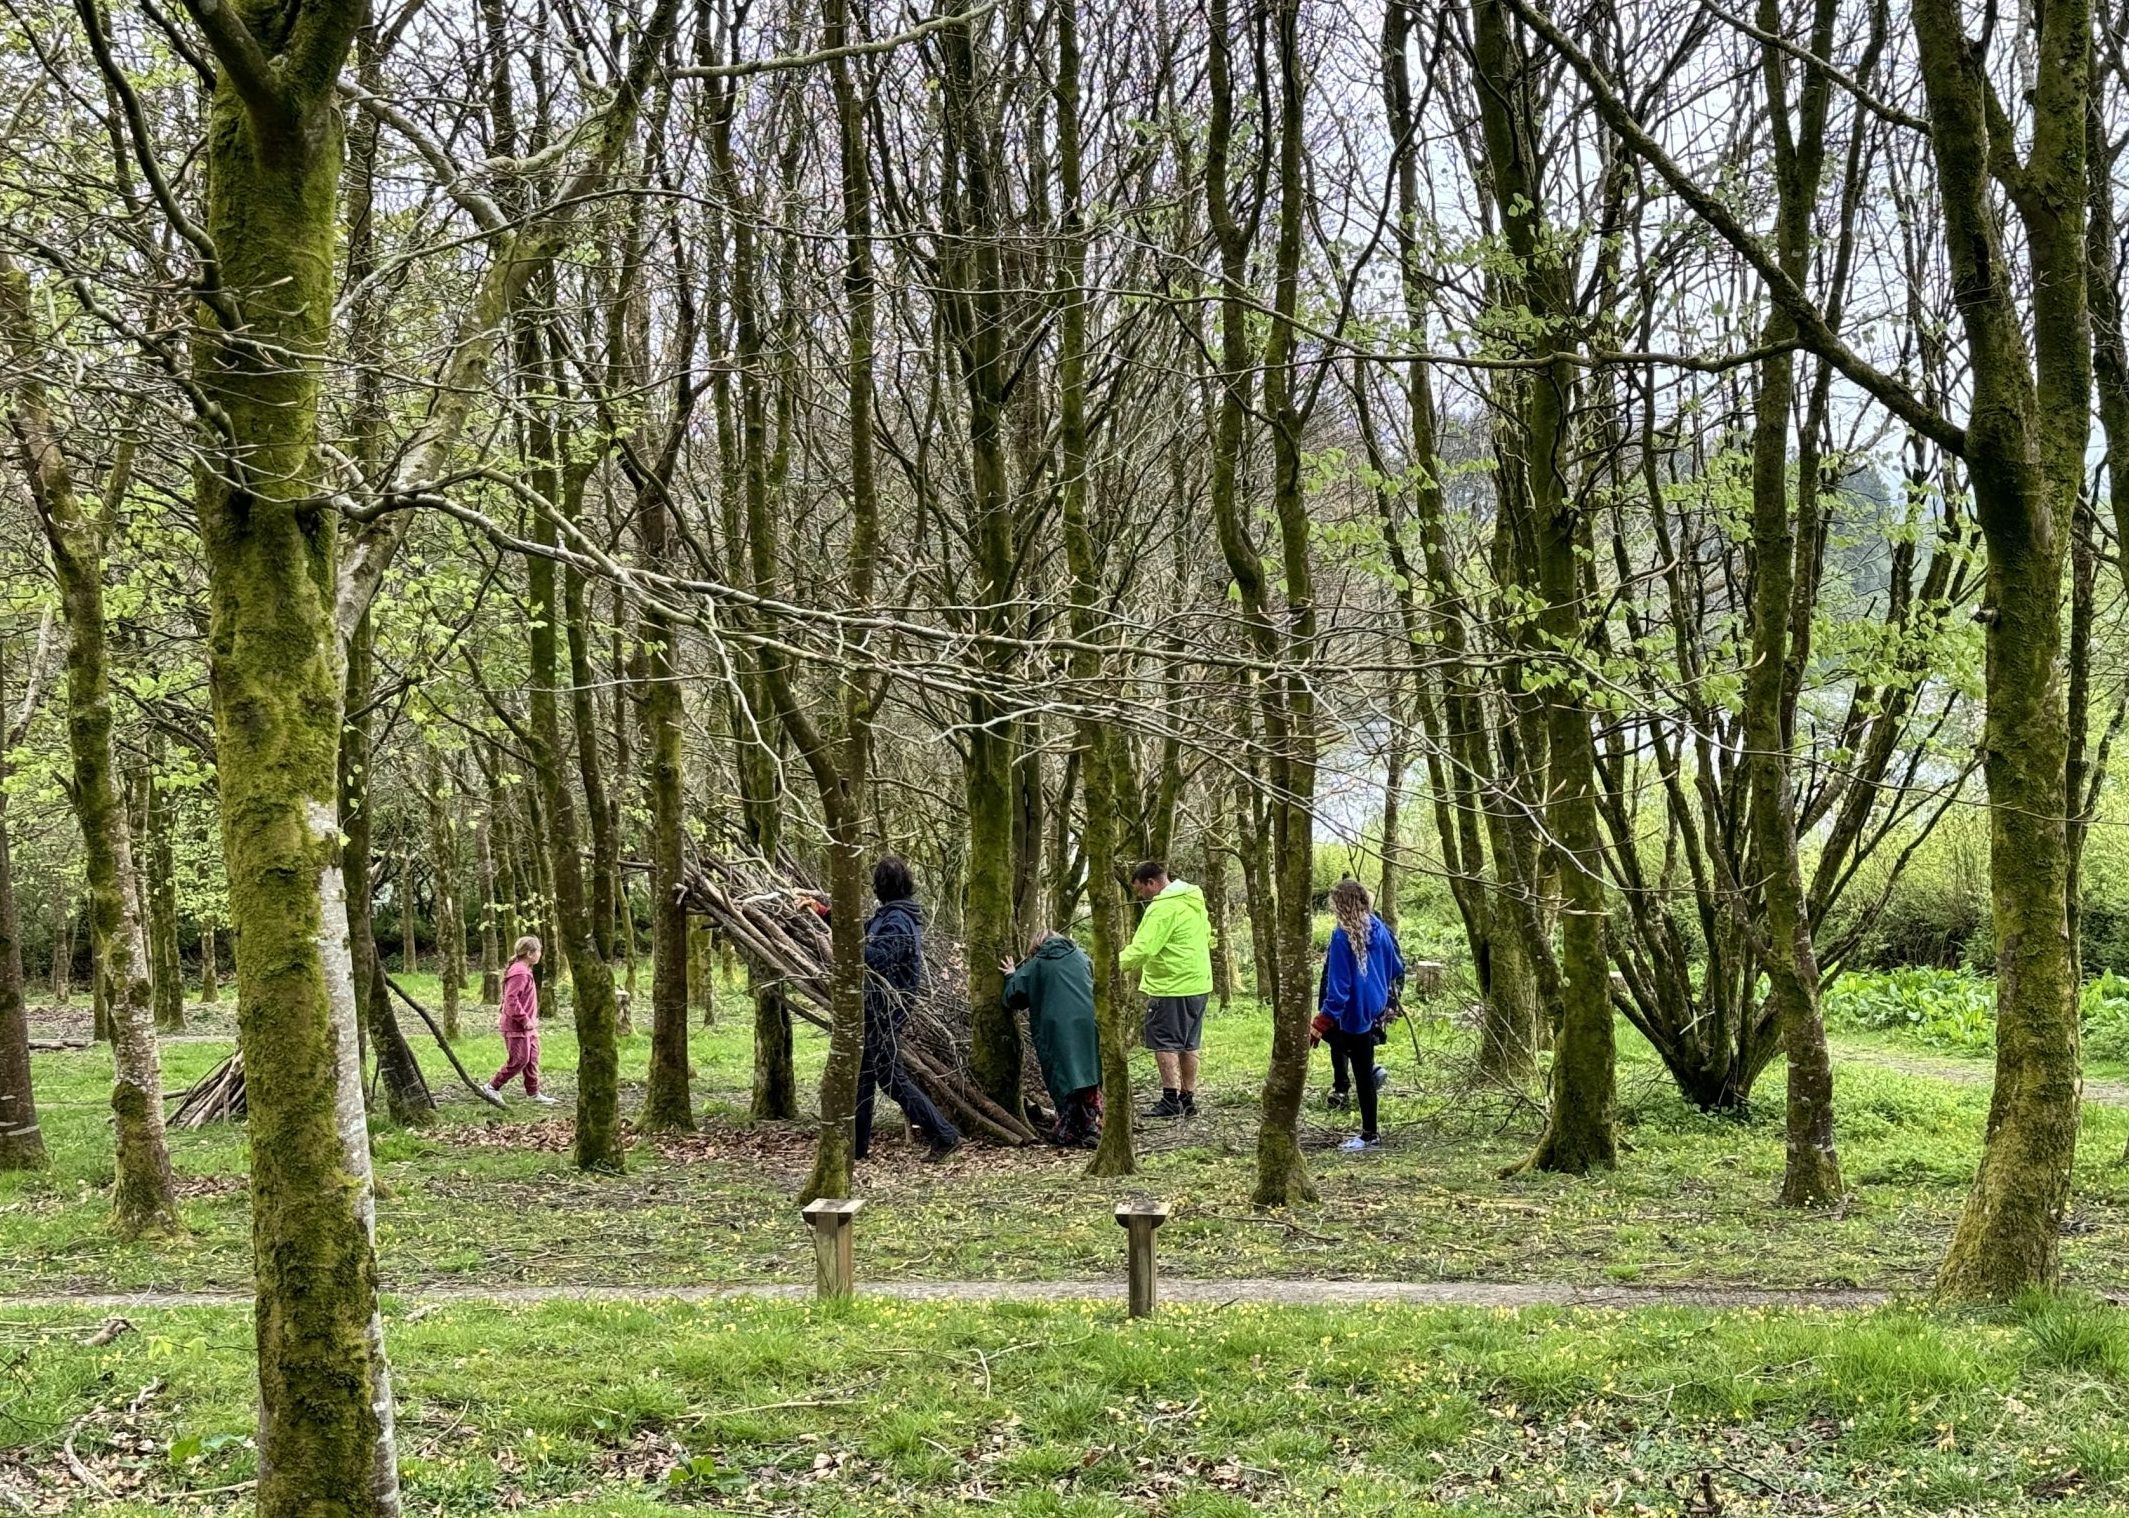 A picture of woodlands and people in the background among the trees building a natural shelter.